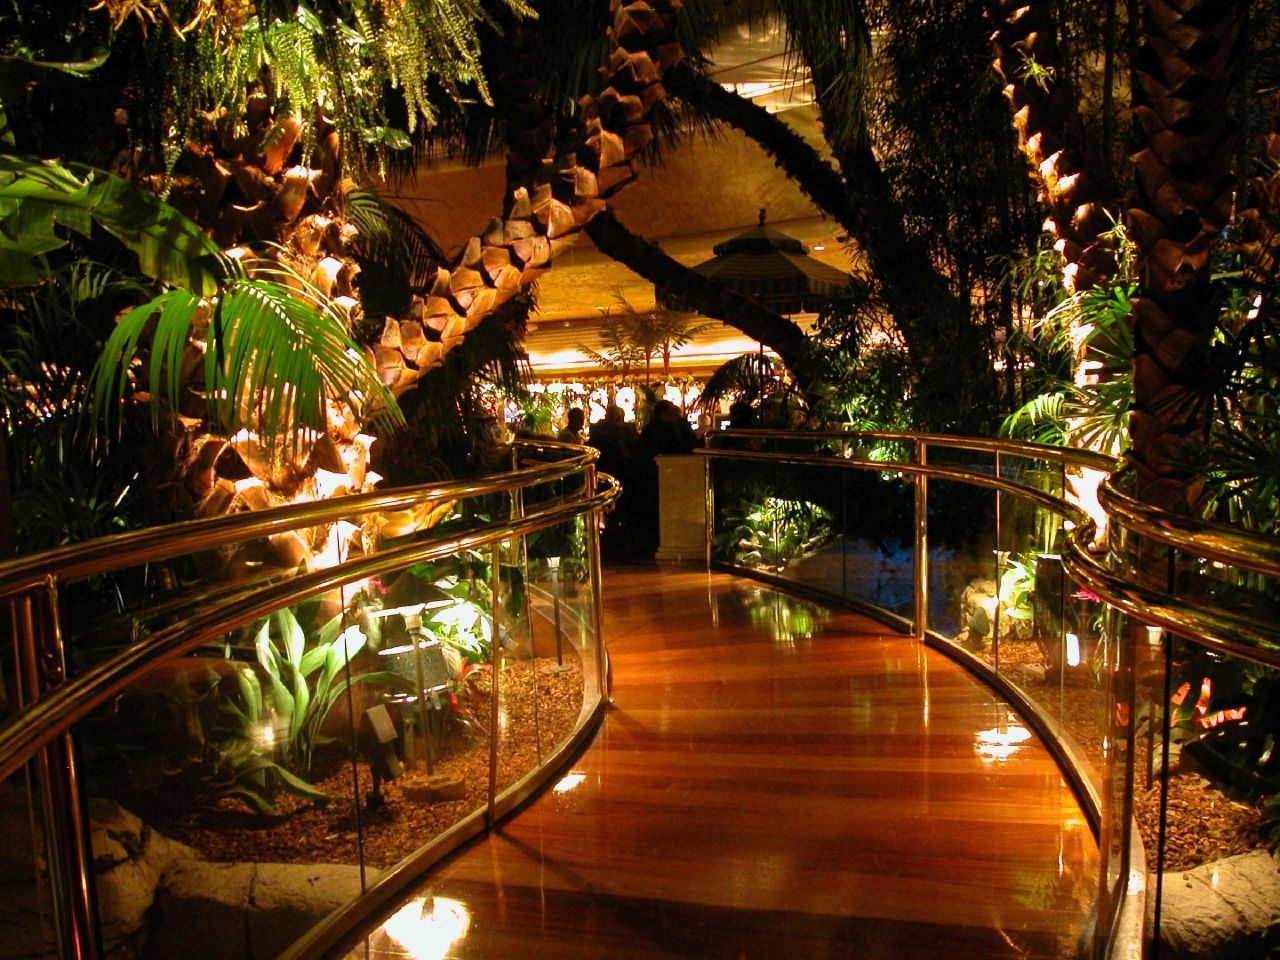 Rainforest Cafe - Take a WILD guess at this Rainforest Cafe's location!